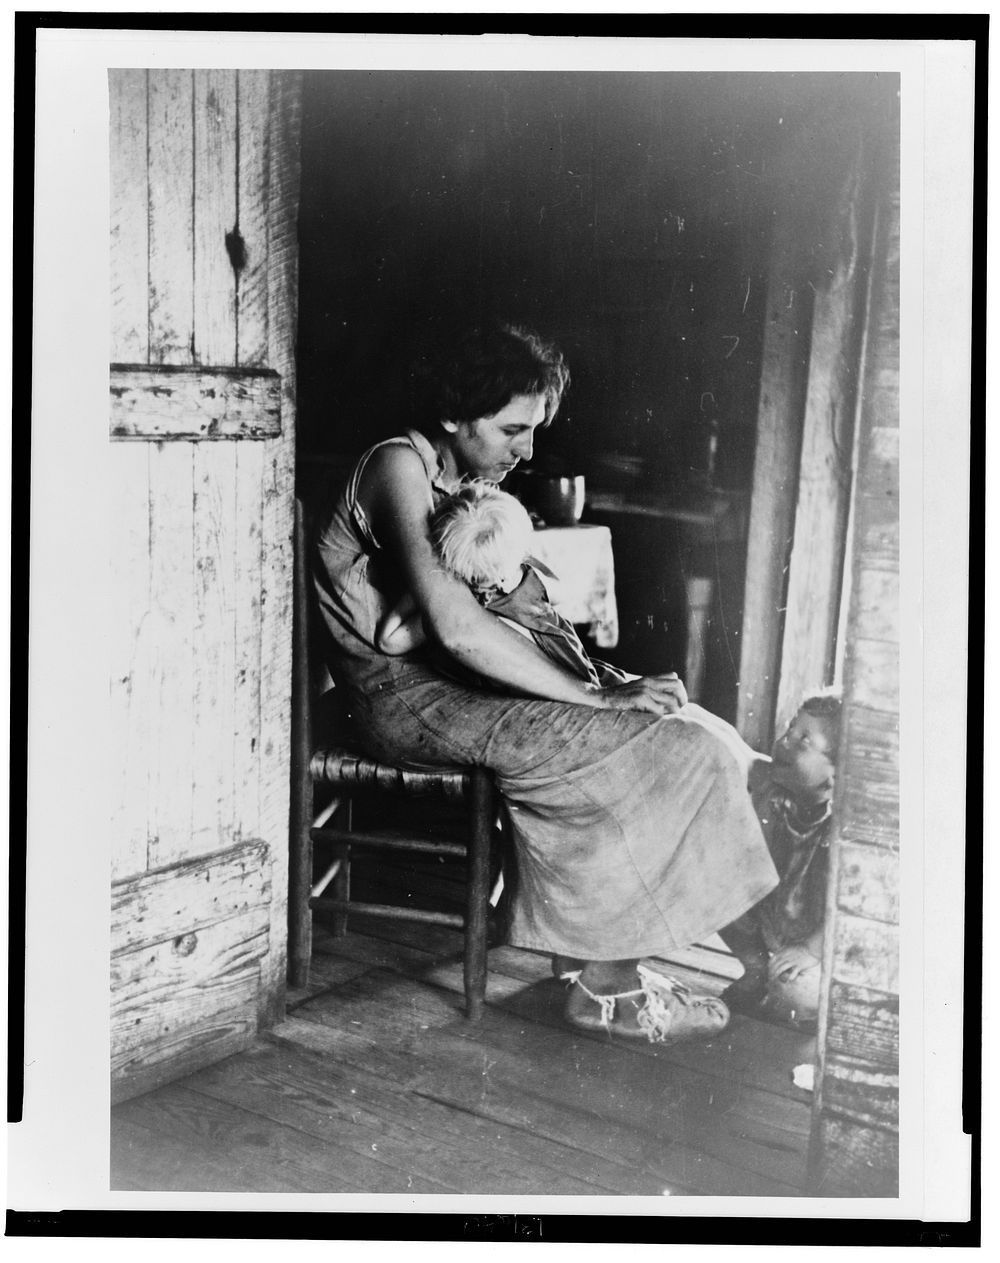 Lily Rogers Fields and children. Hale County, Alabama. Sourced from the Library of Congress.